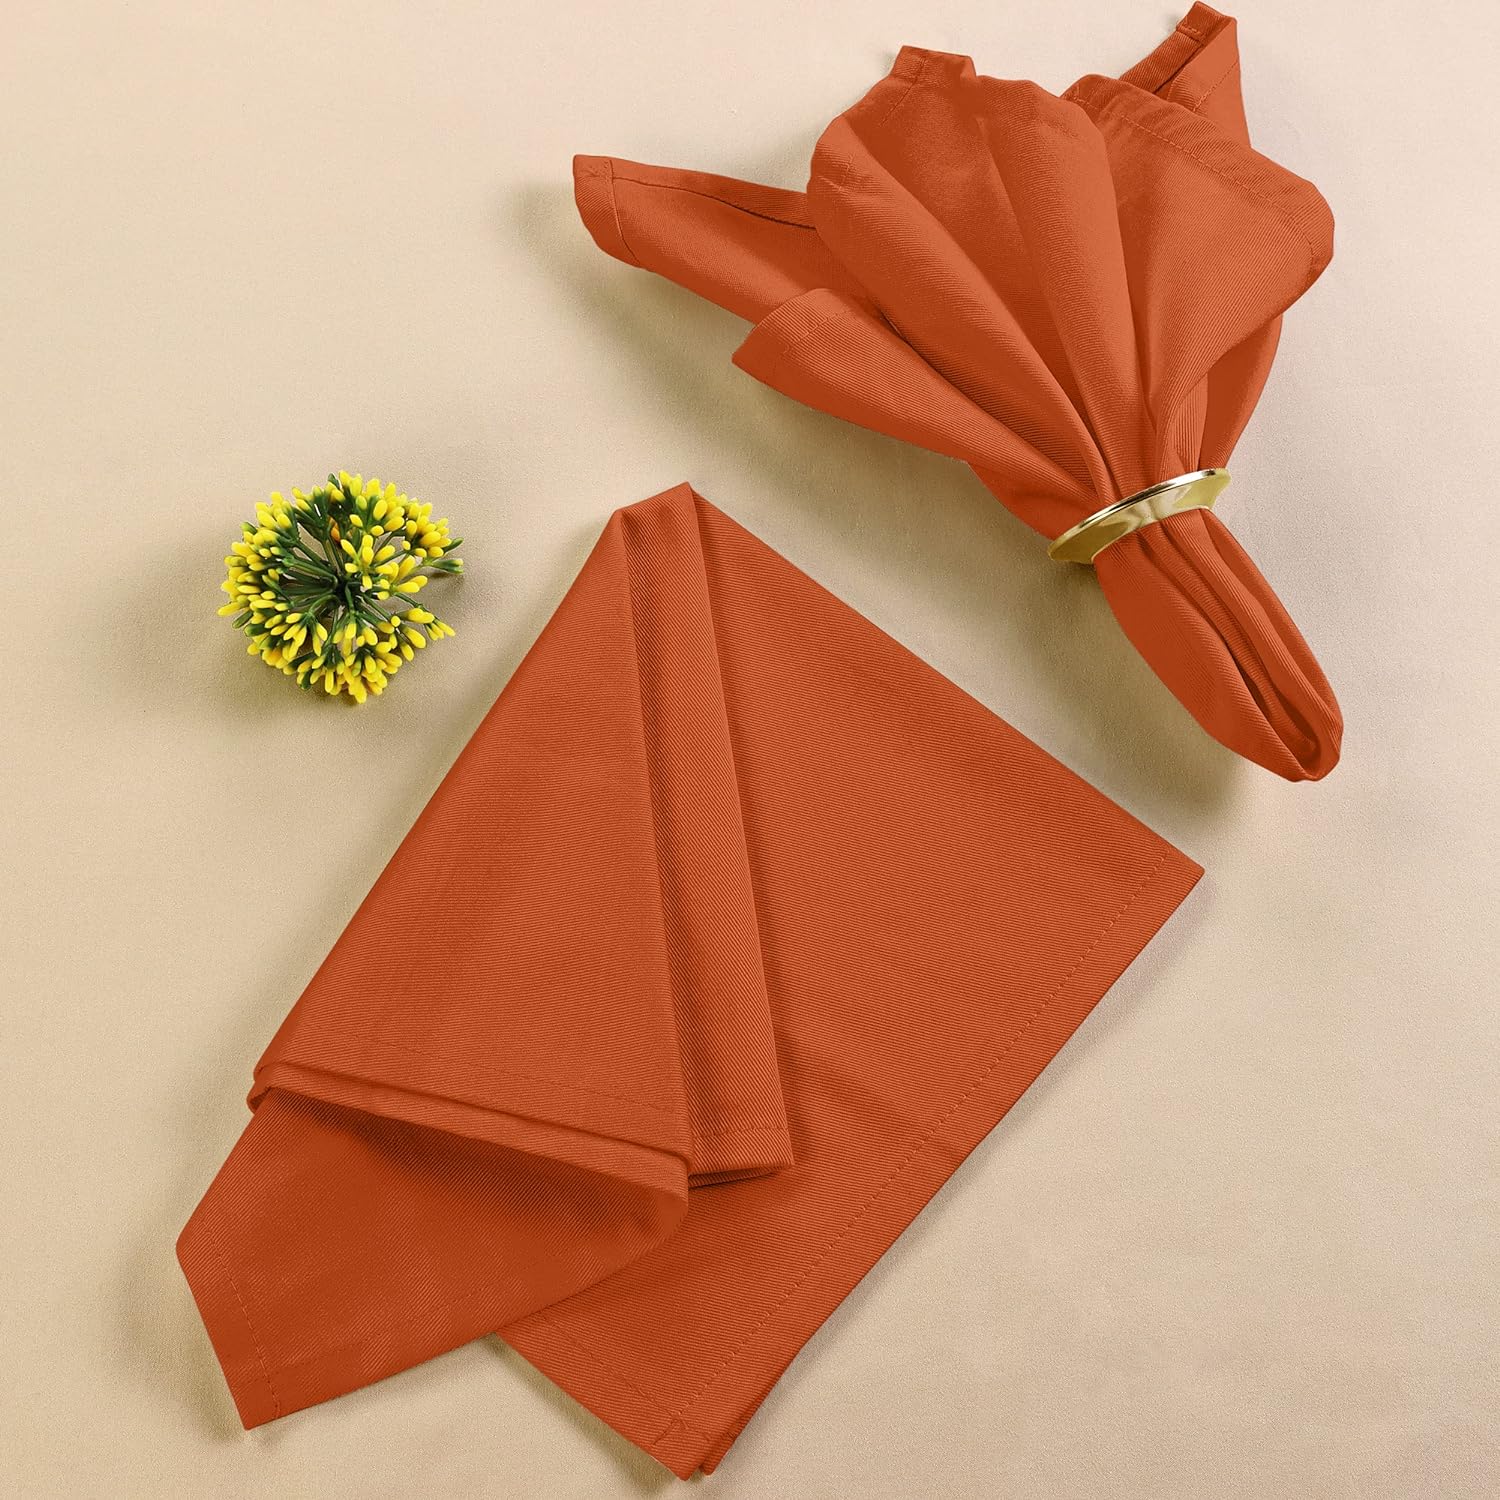 Orange Dinner Cloth Napkins Set of 12, Cotton 18x18 in Reusable and  Washable